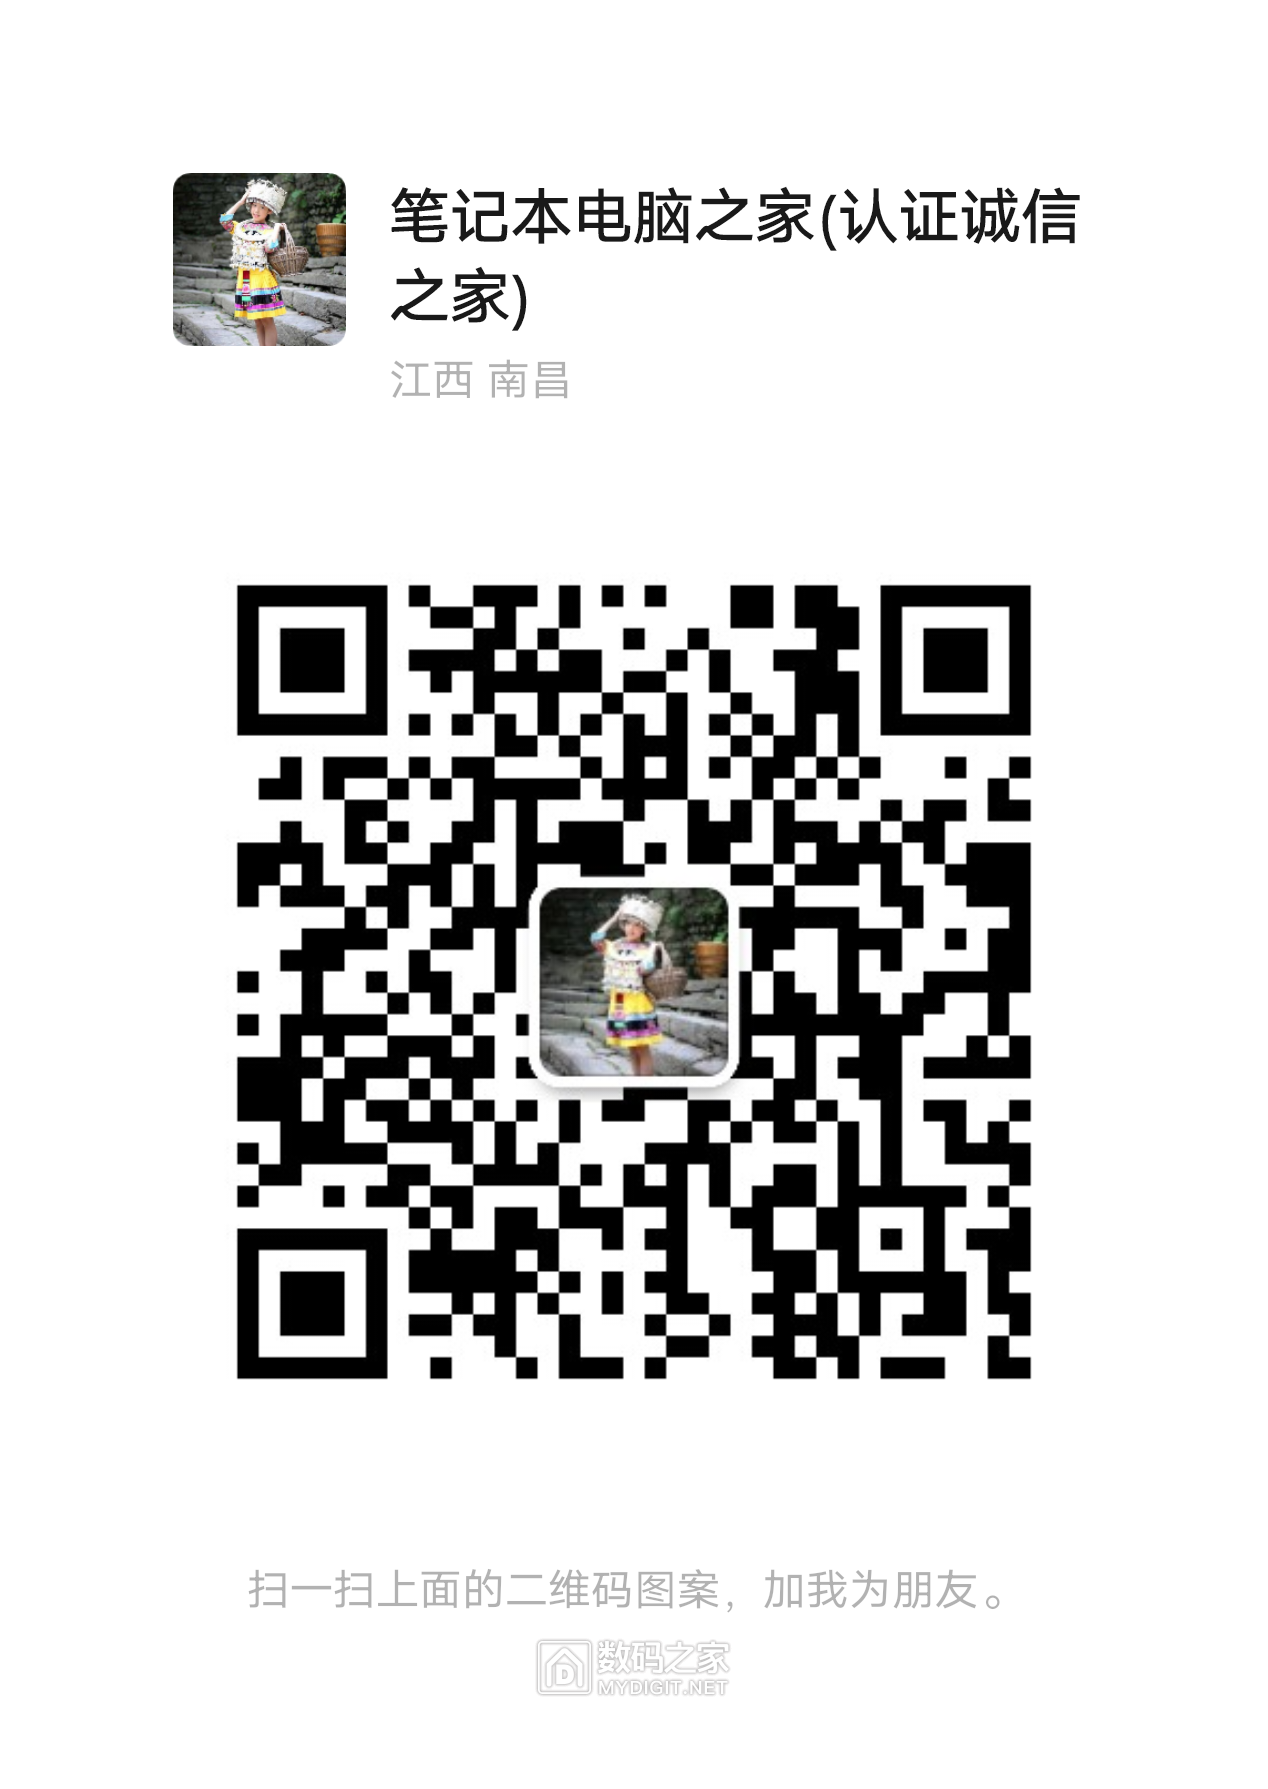 wechat_upload17129062046618dfdcc1383